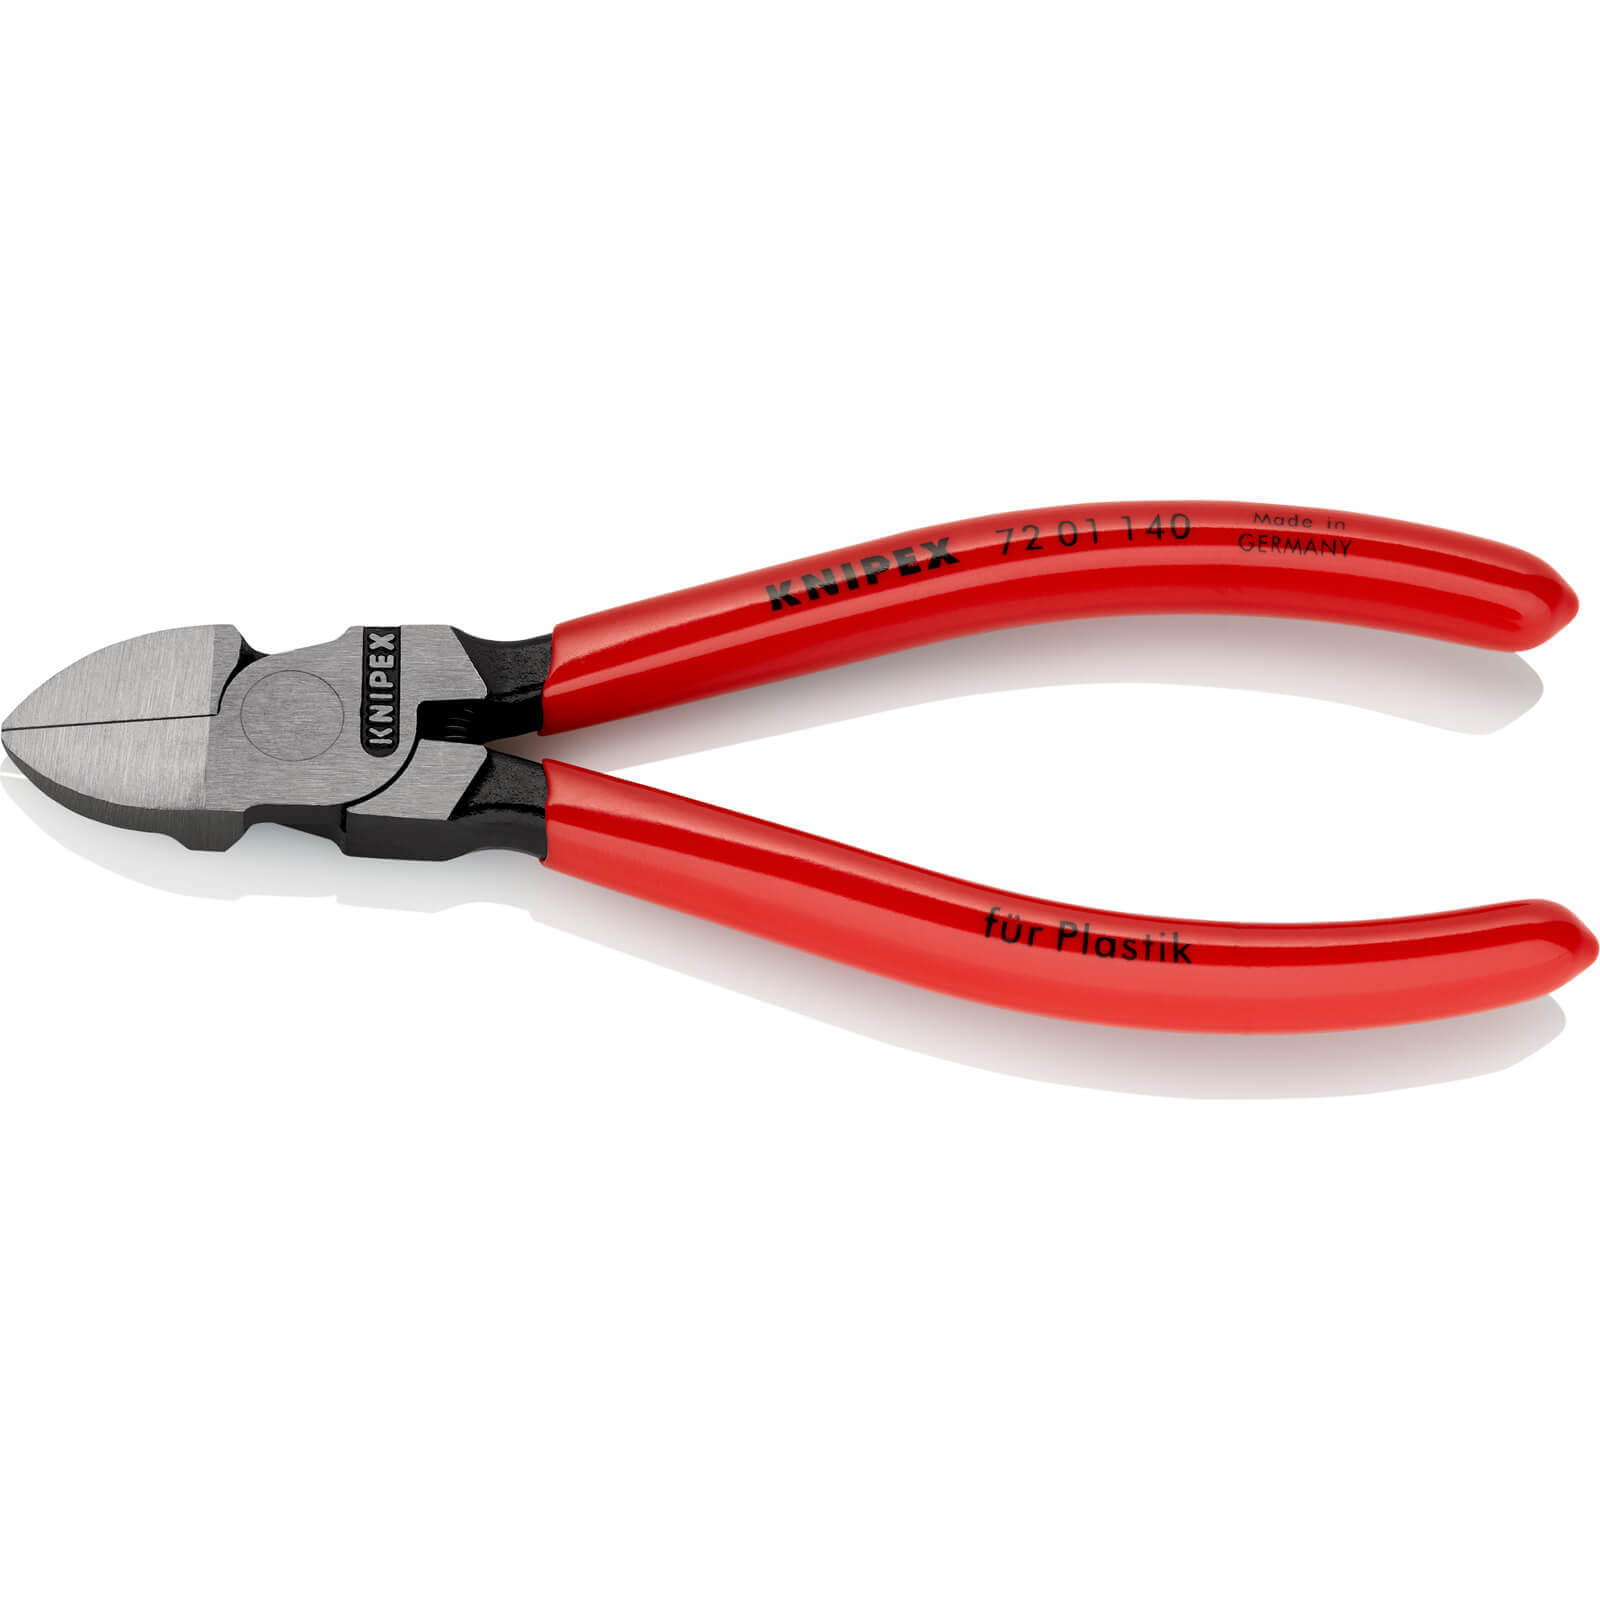 Photo of Knipex 72 01 Diagonal Cutting Pliers For Plastics 140mm